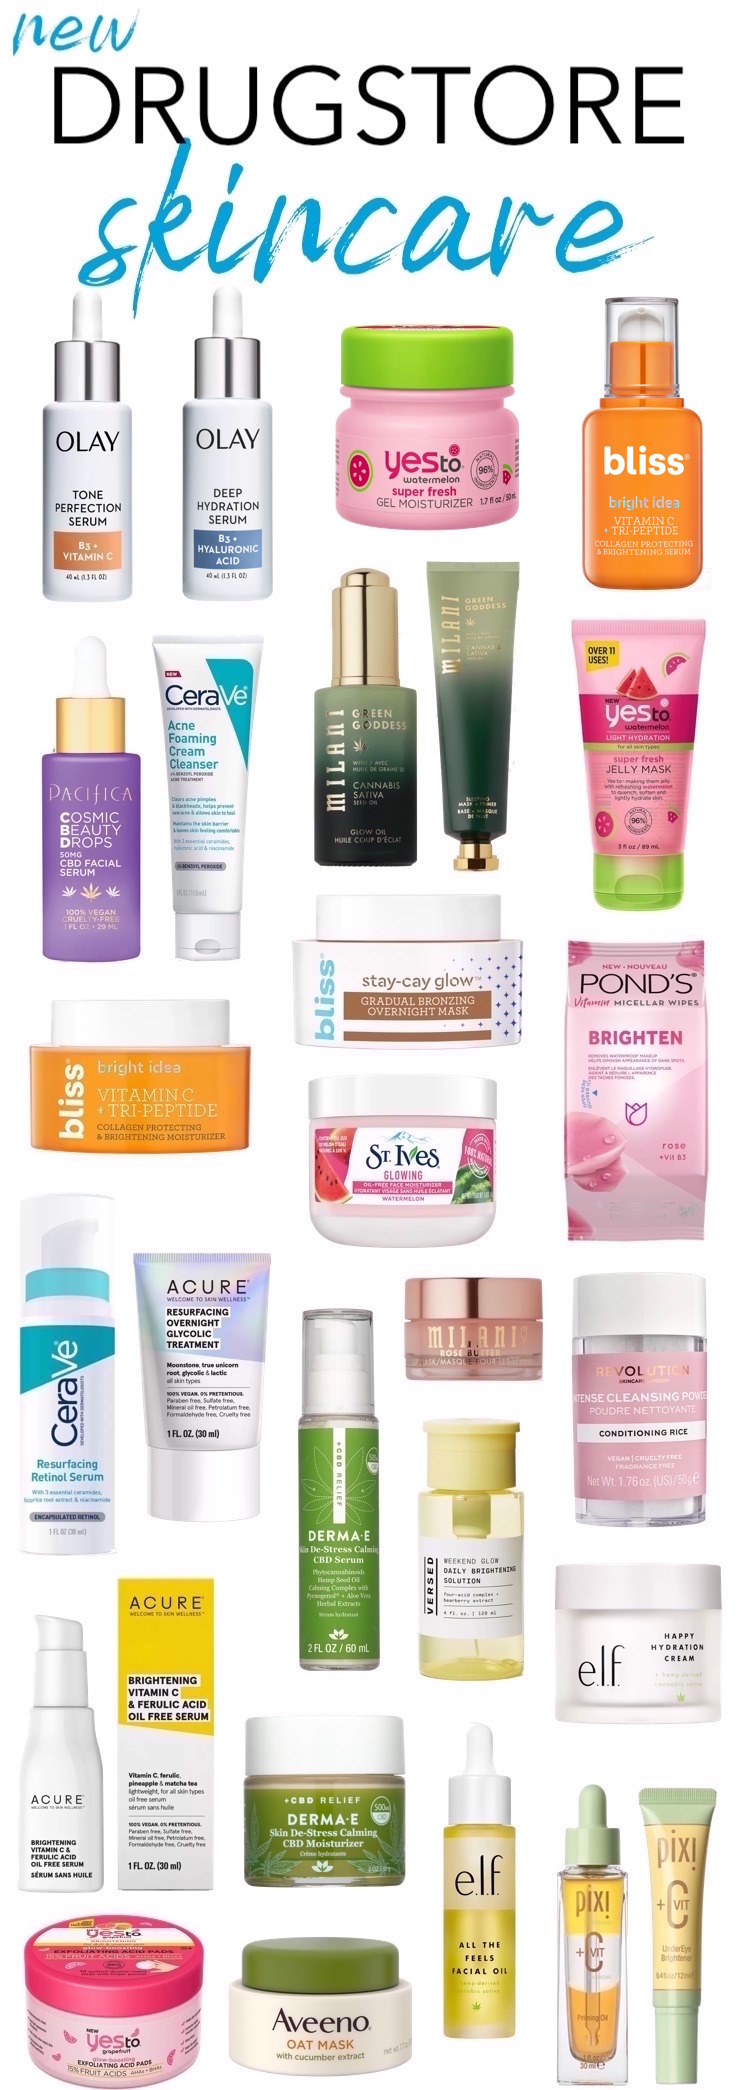 New Drugstore Skincare Products to Try in 2020